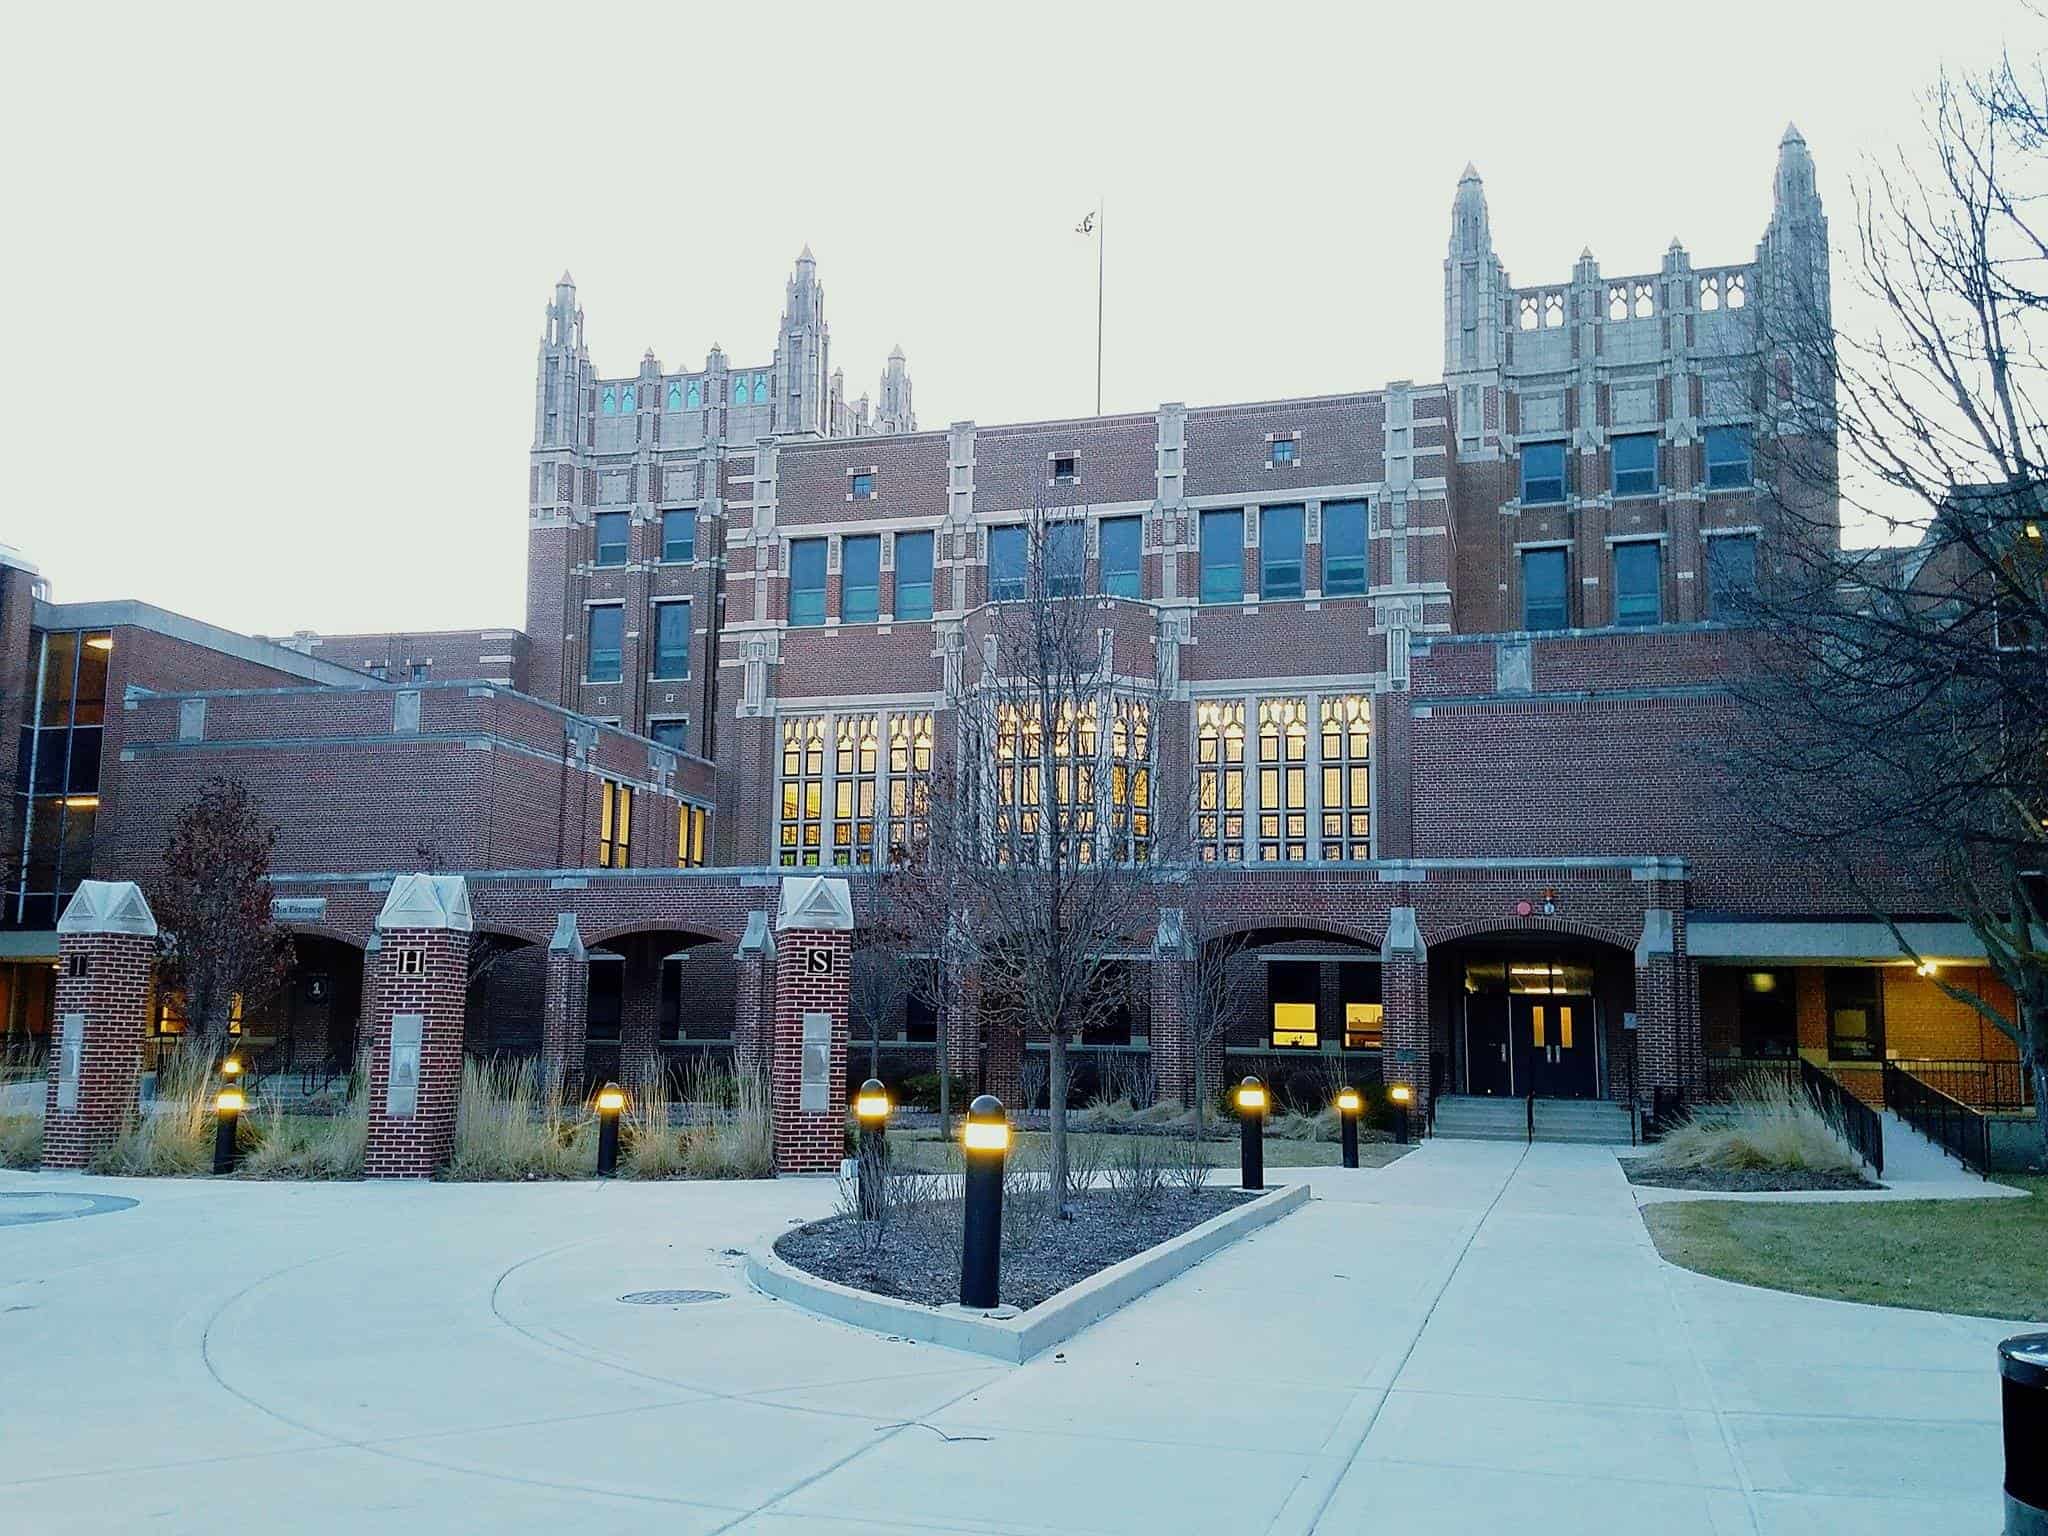 Evanston Township High School front by Damperpedal